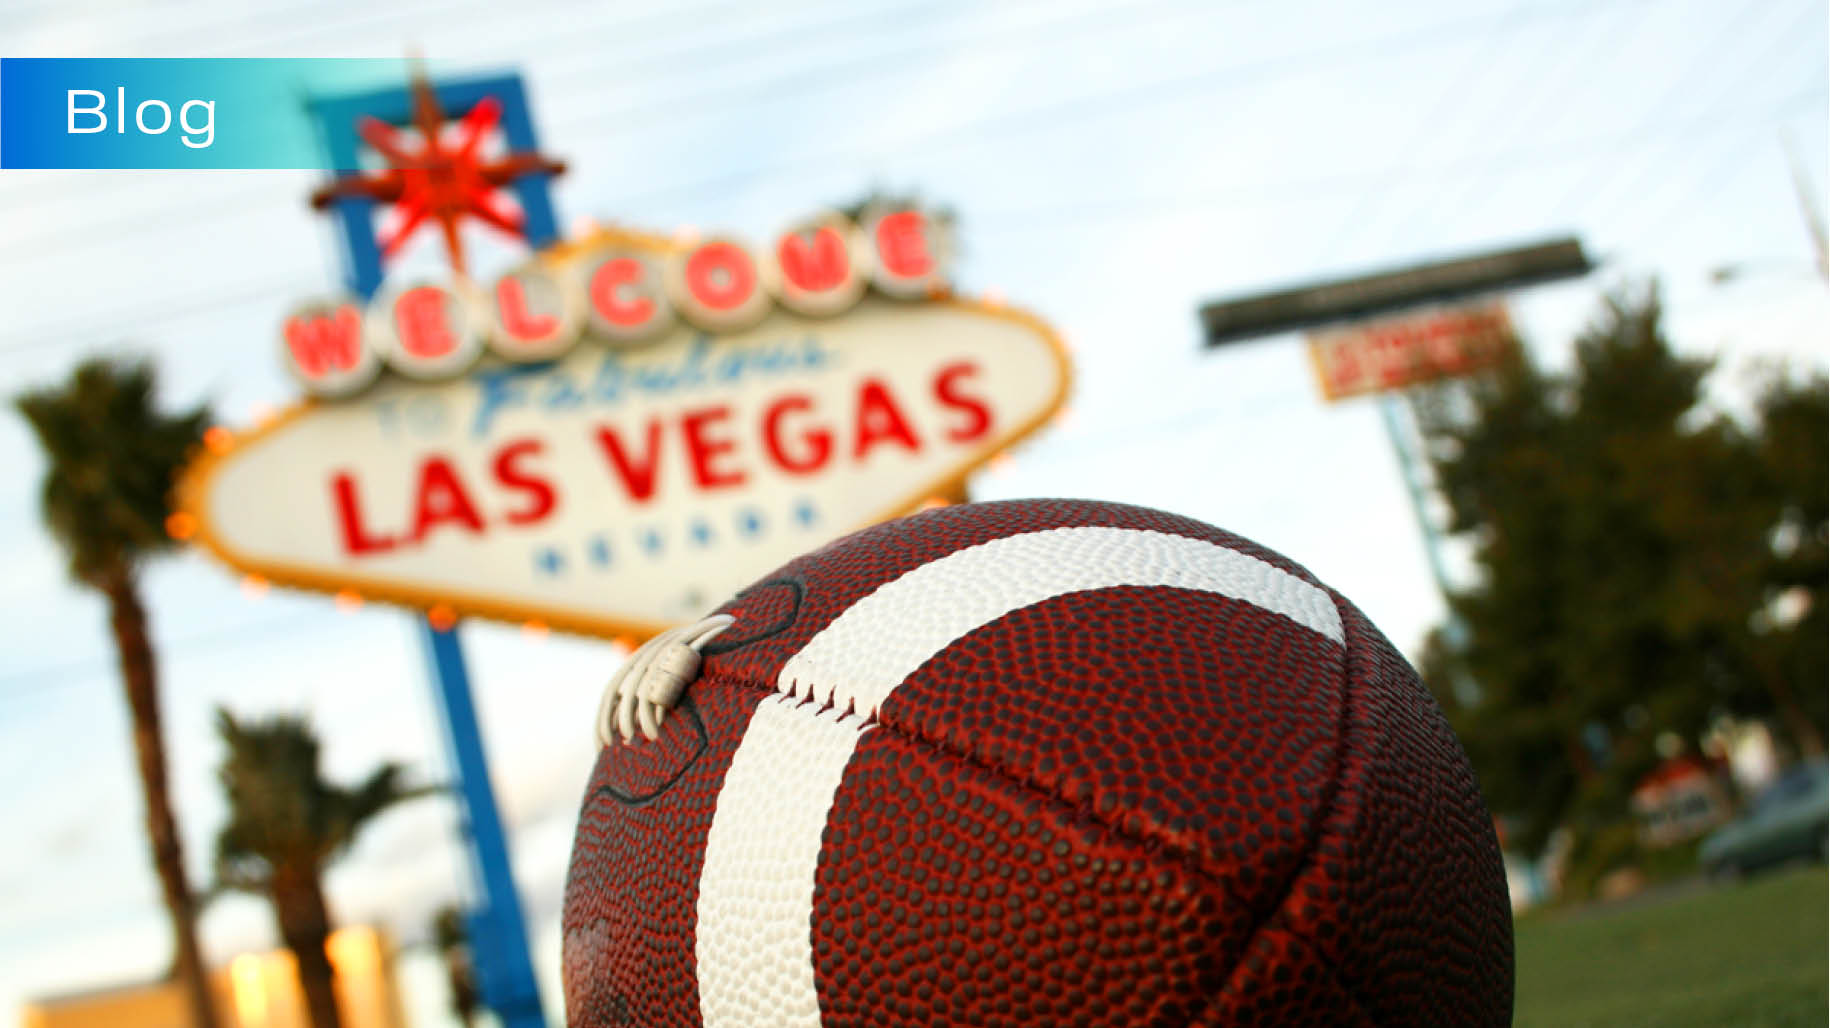 Sports betting illustrated by football by the Las Vegas Sign